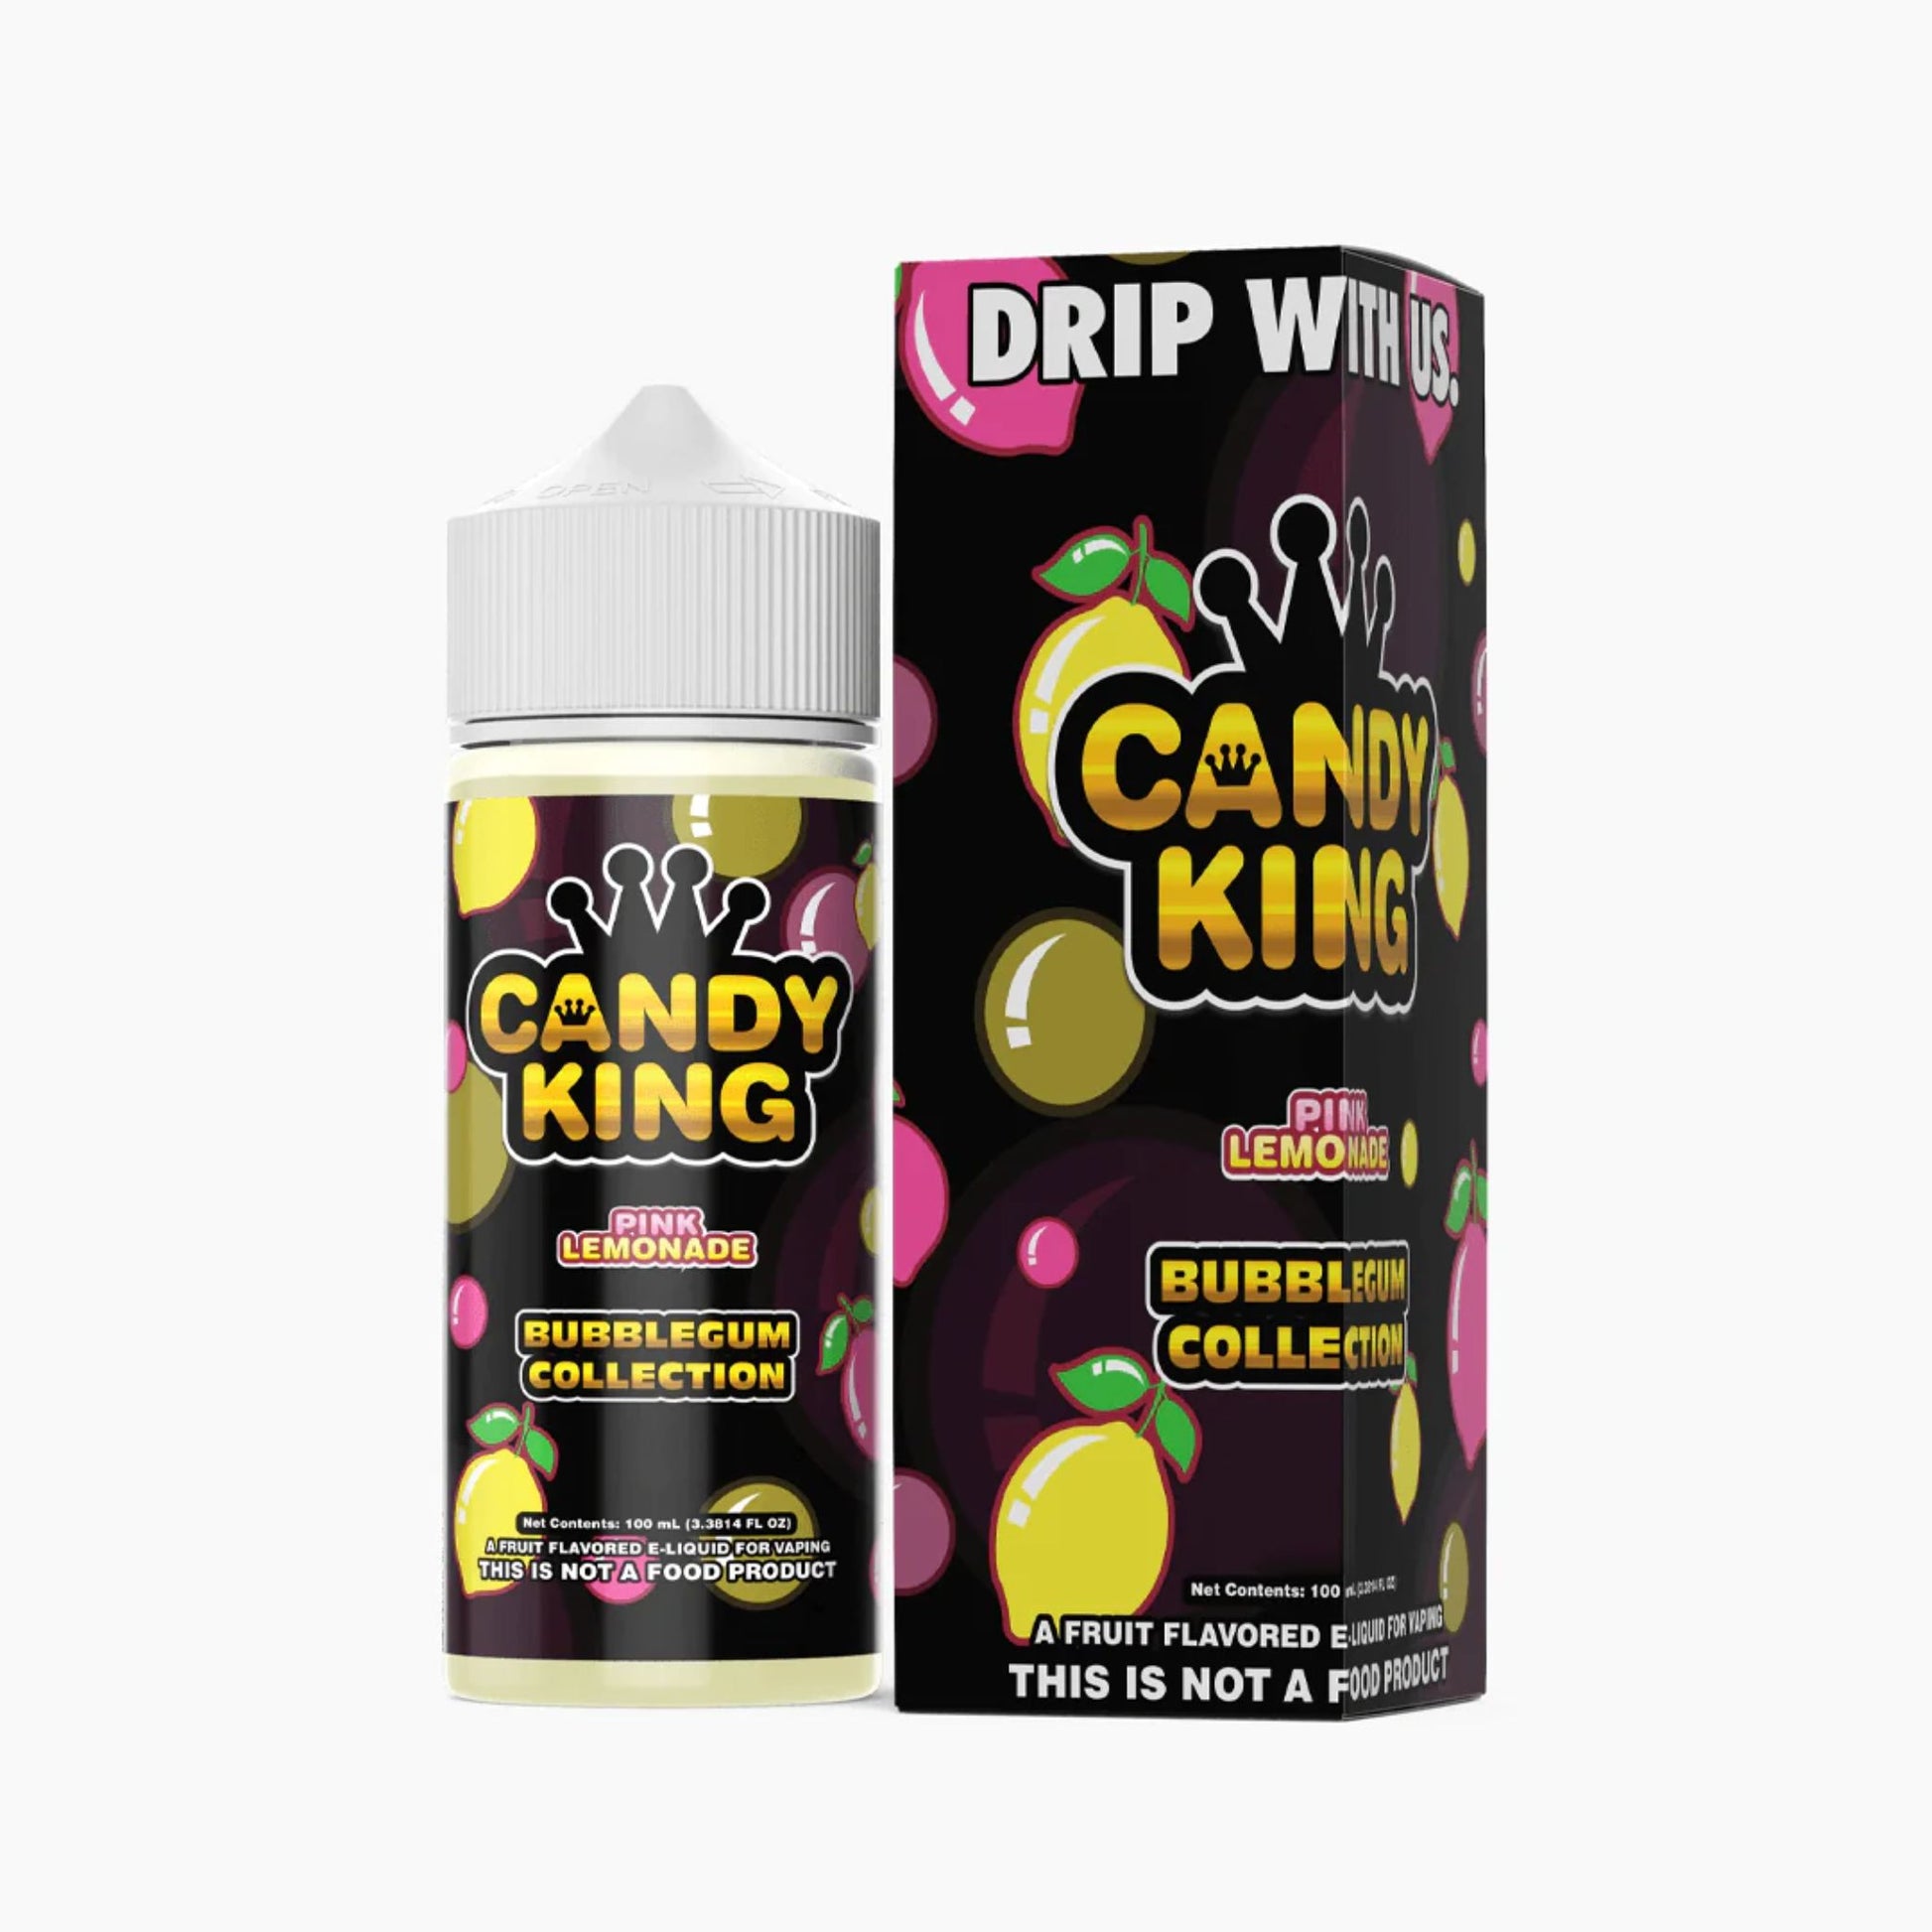 Candy King Bubblegum Collection | Pink Lemonade | 100ml bottle and box